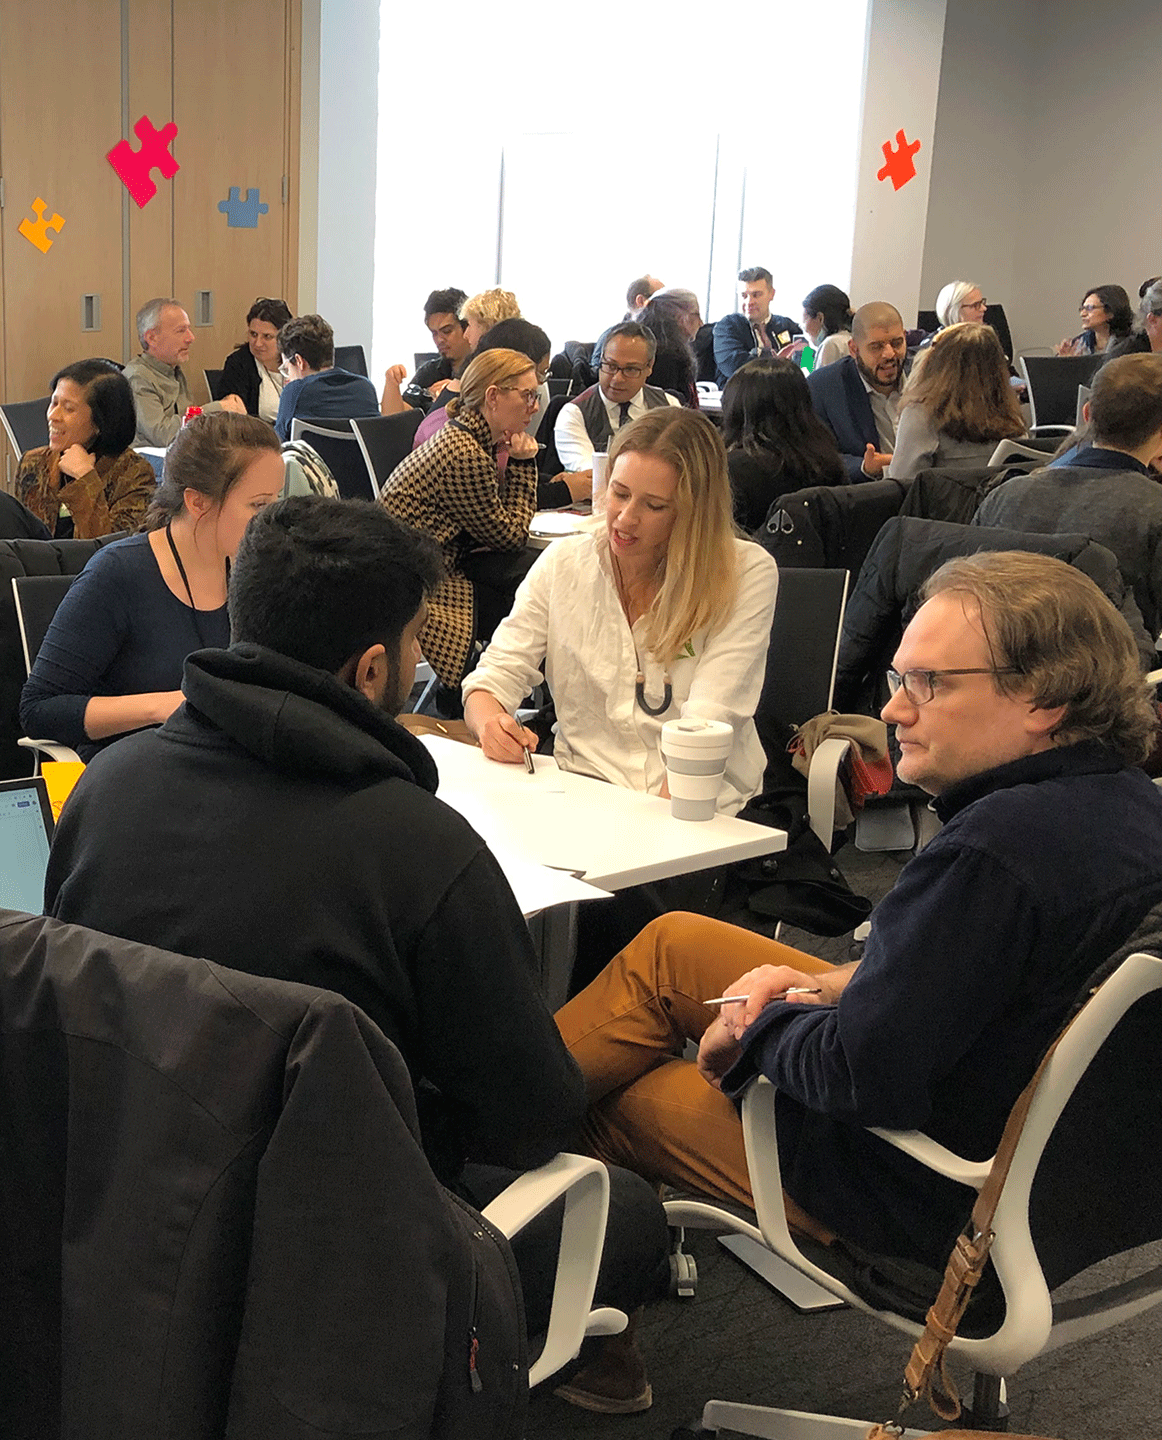 Ryerson faculty and staff are sitting in tables during discussion groups as part of the experiential learning community of practice.